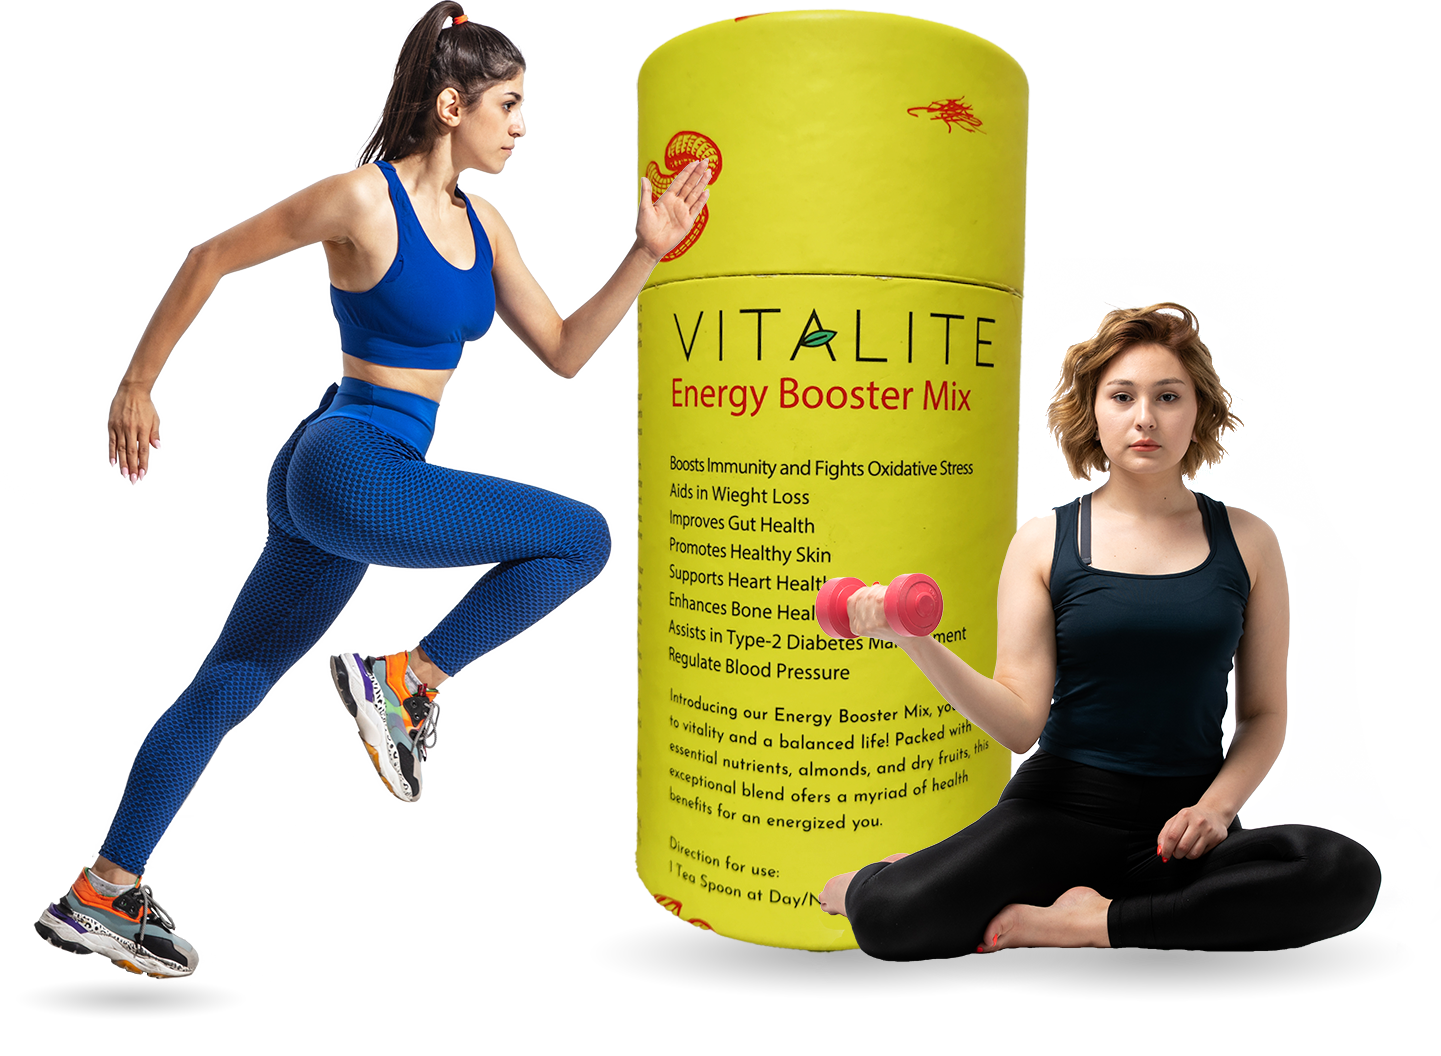 Experience the power of nature with Vitalite's Energy Booster Mix.!